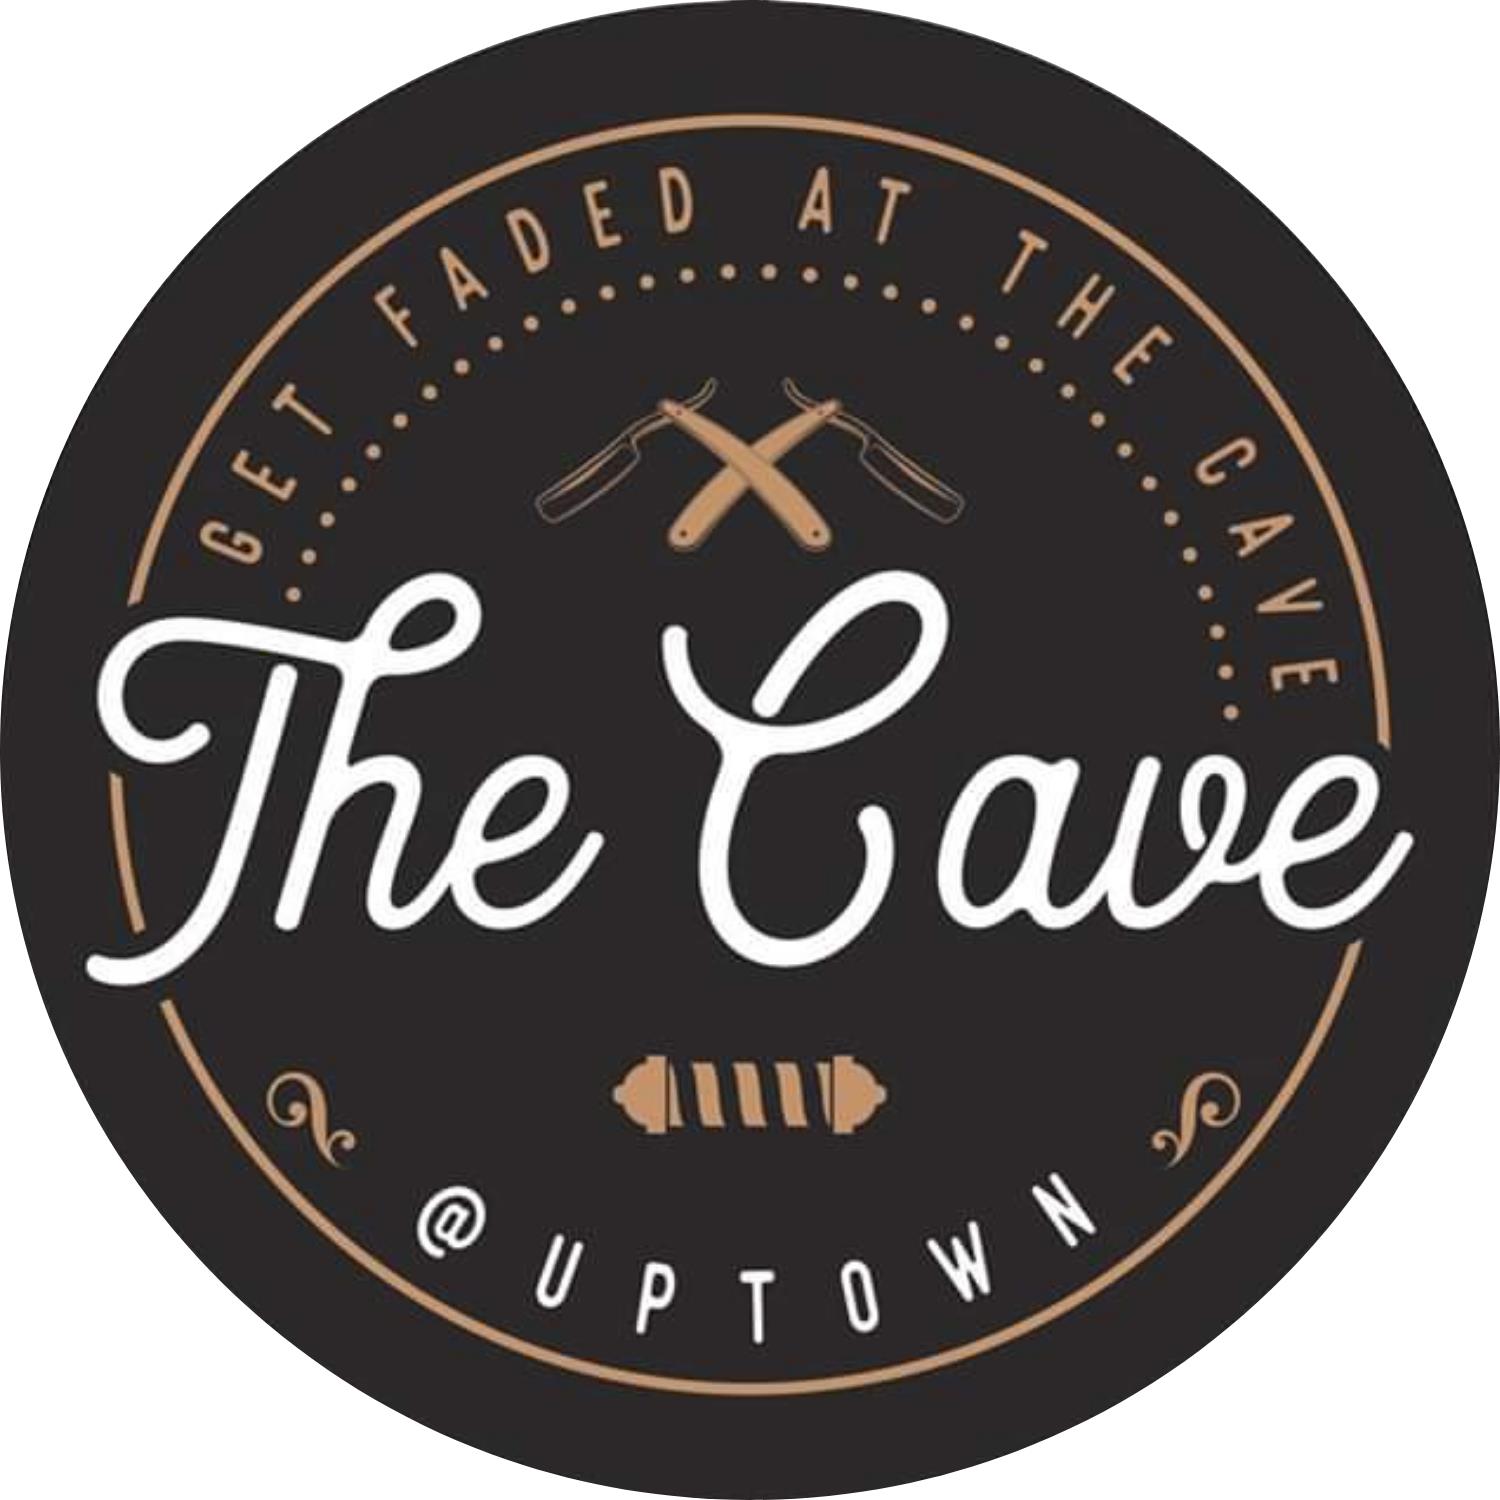 The Cave @ Uptown Barbershop